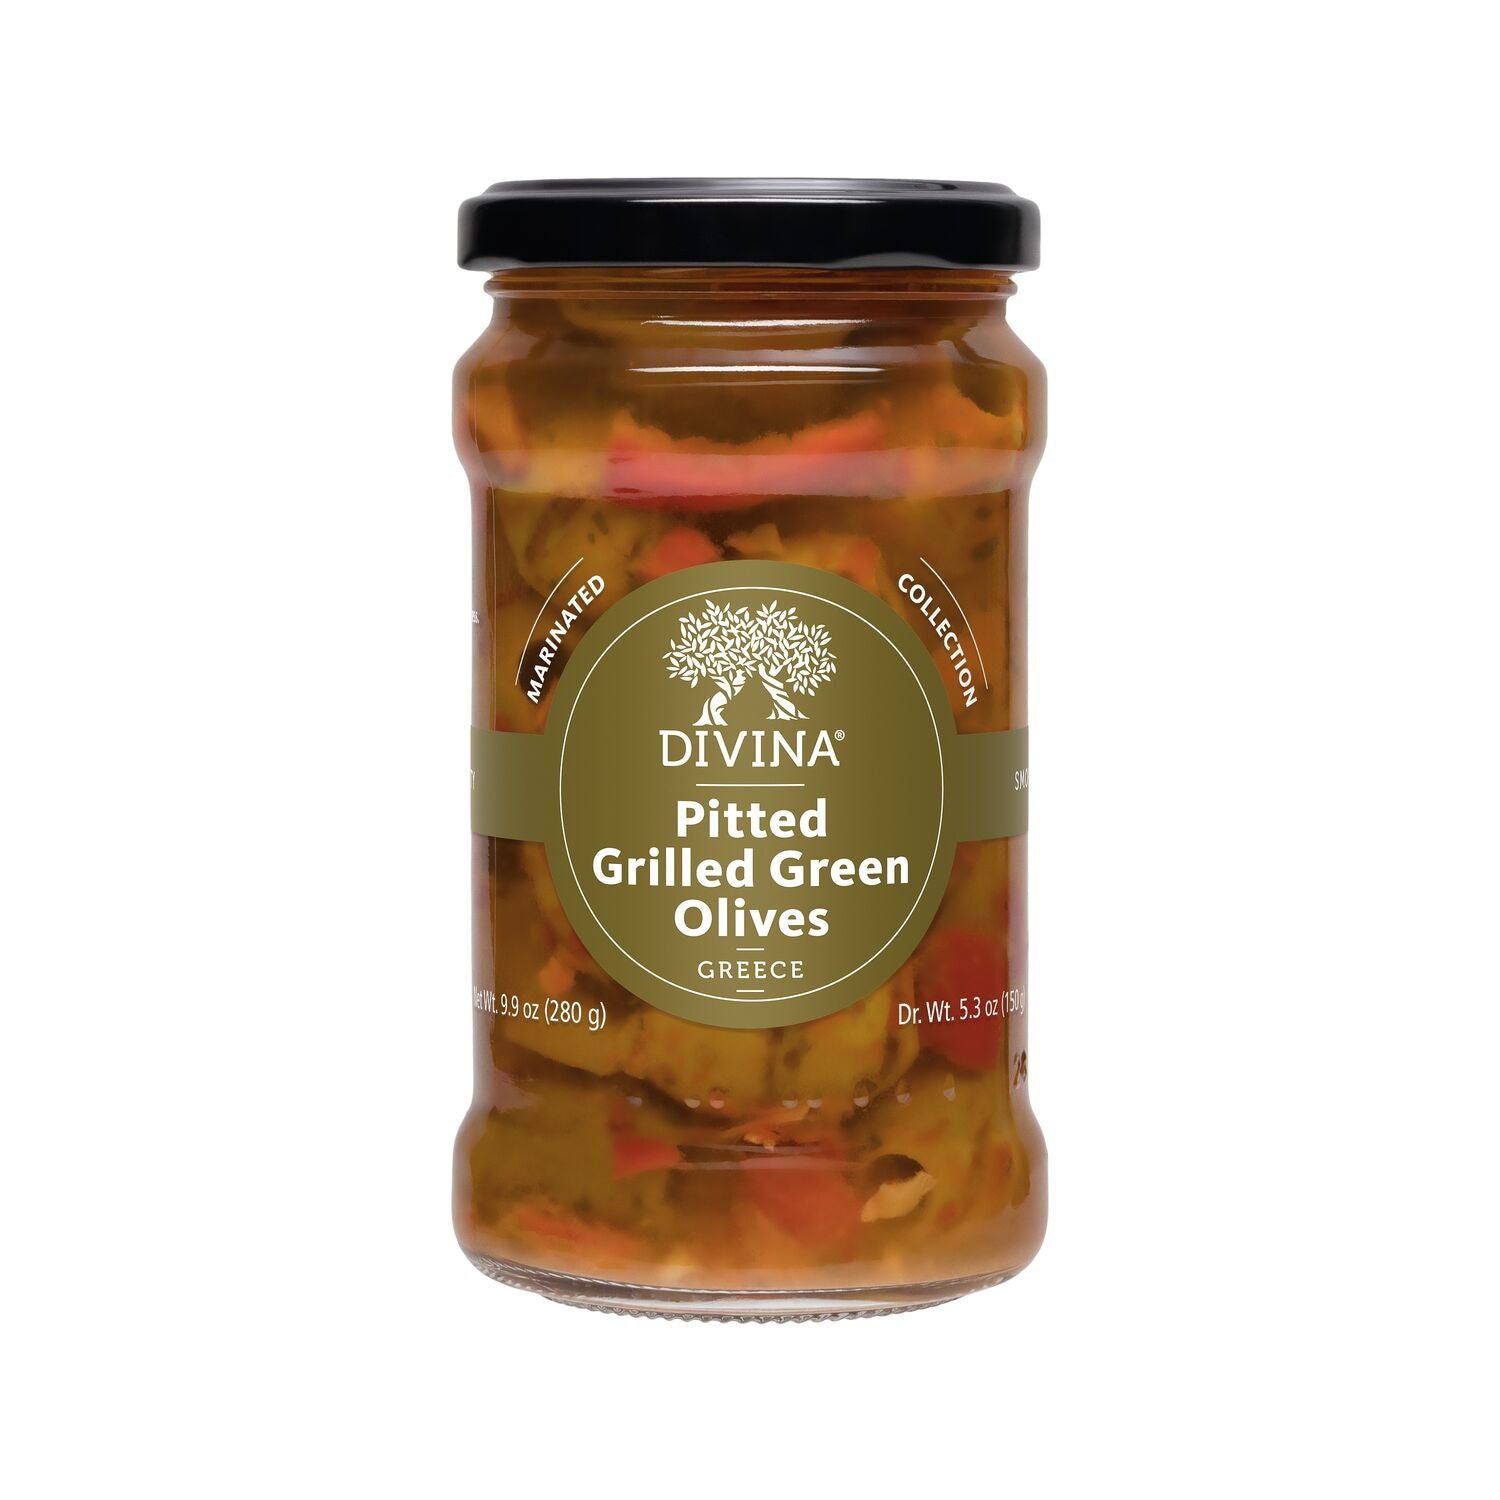 Pitted Grilled Green Olives